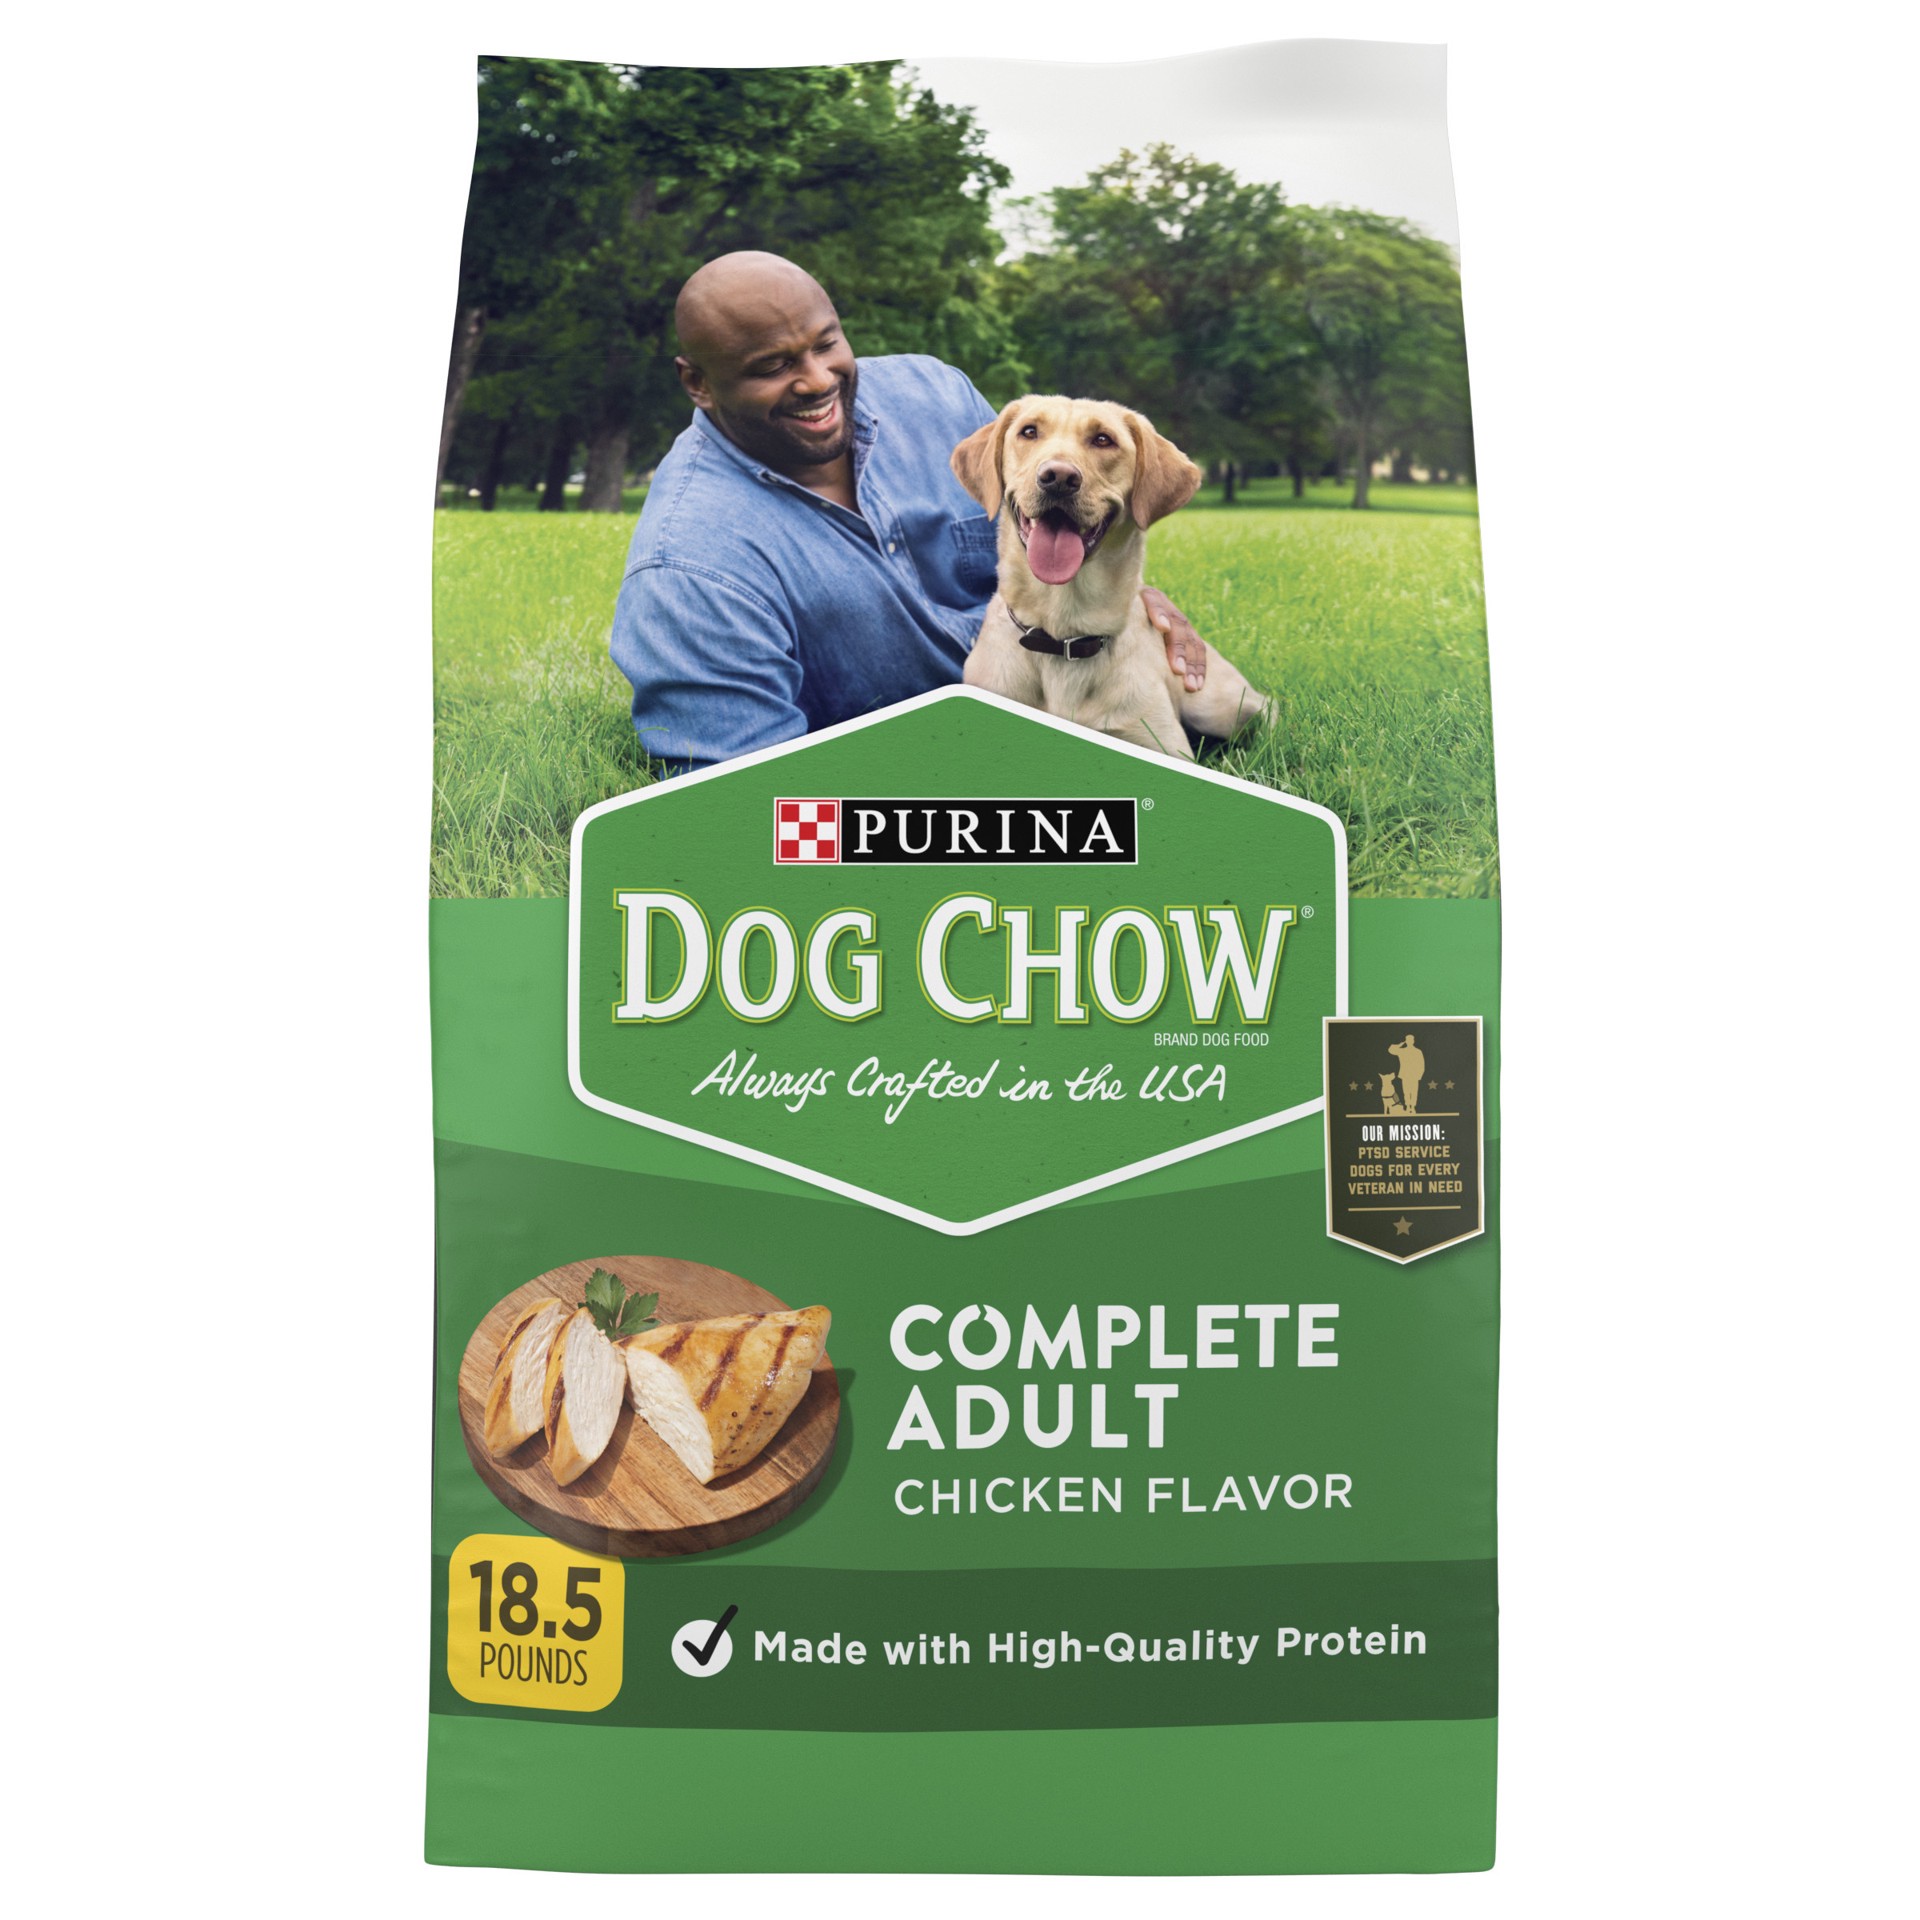 slide 1 of 9, Dog Chow Purina Dog Chow Complete Adult Dry Dog Food Kibble With Chicken Flavor, 18.5 lb